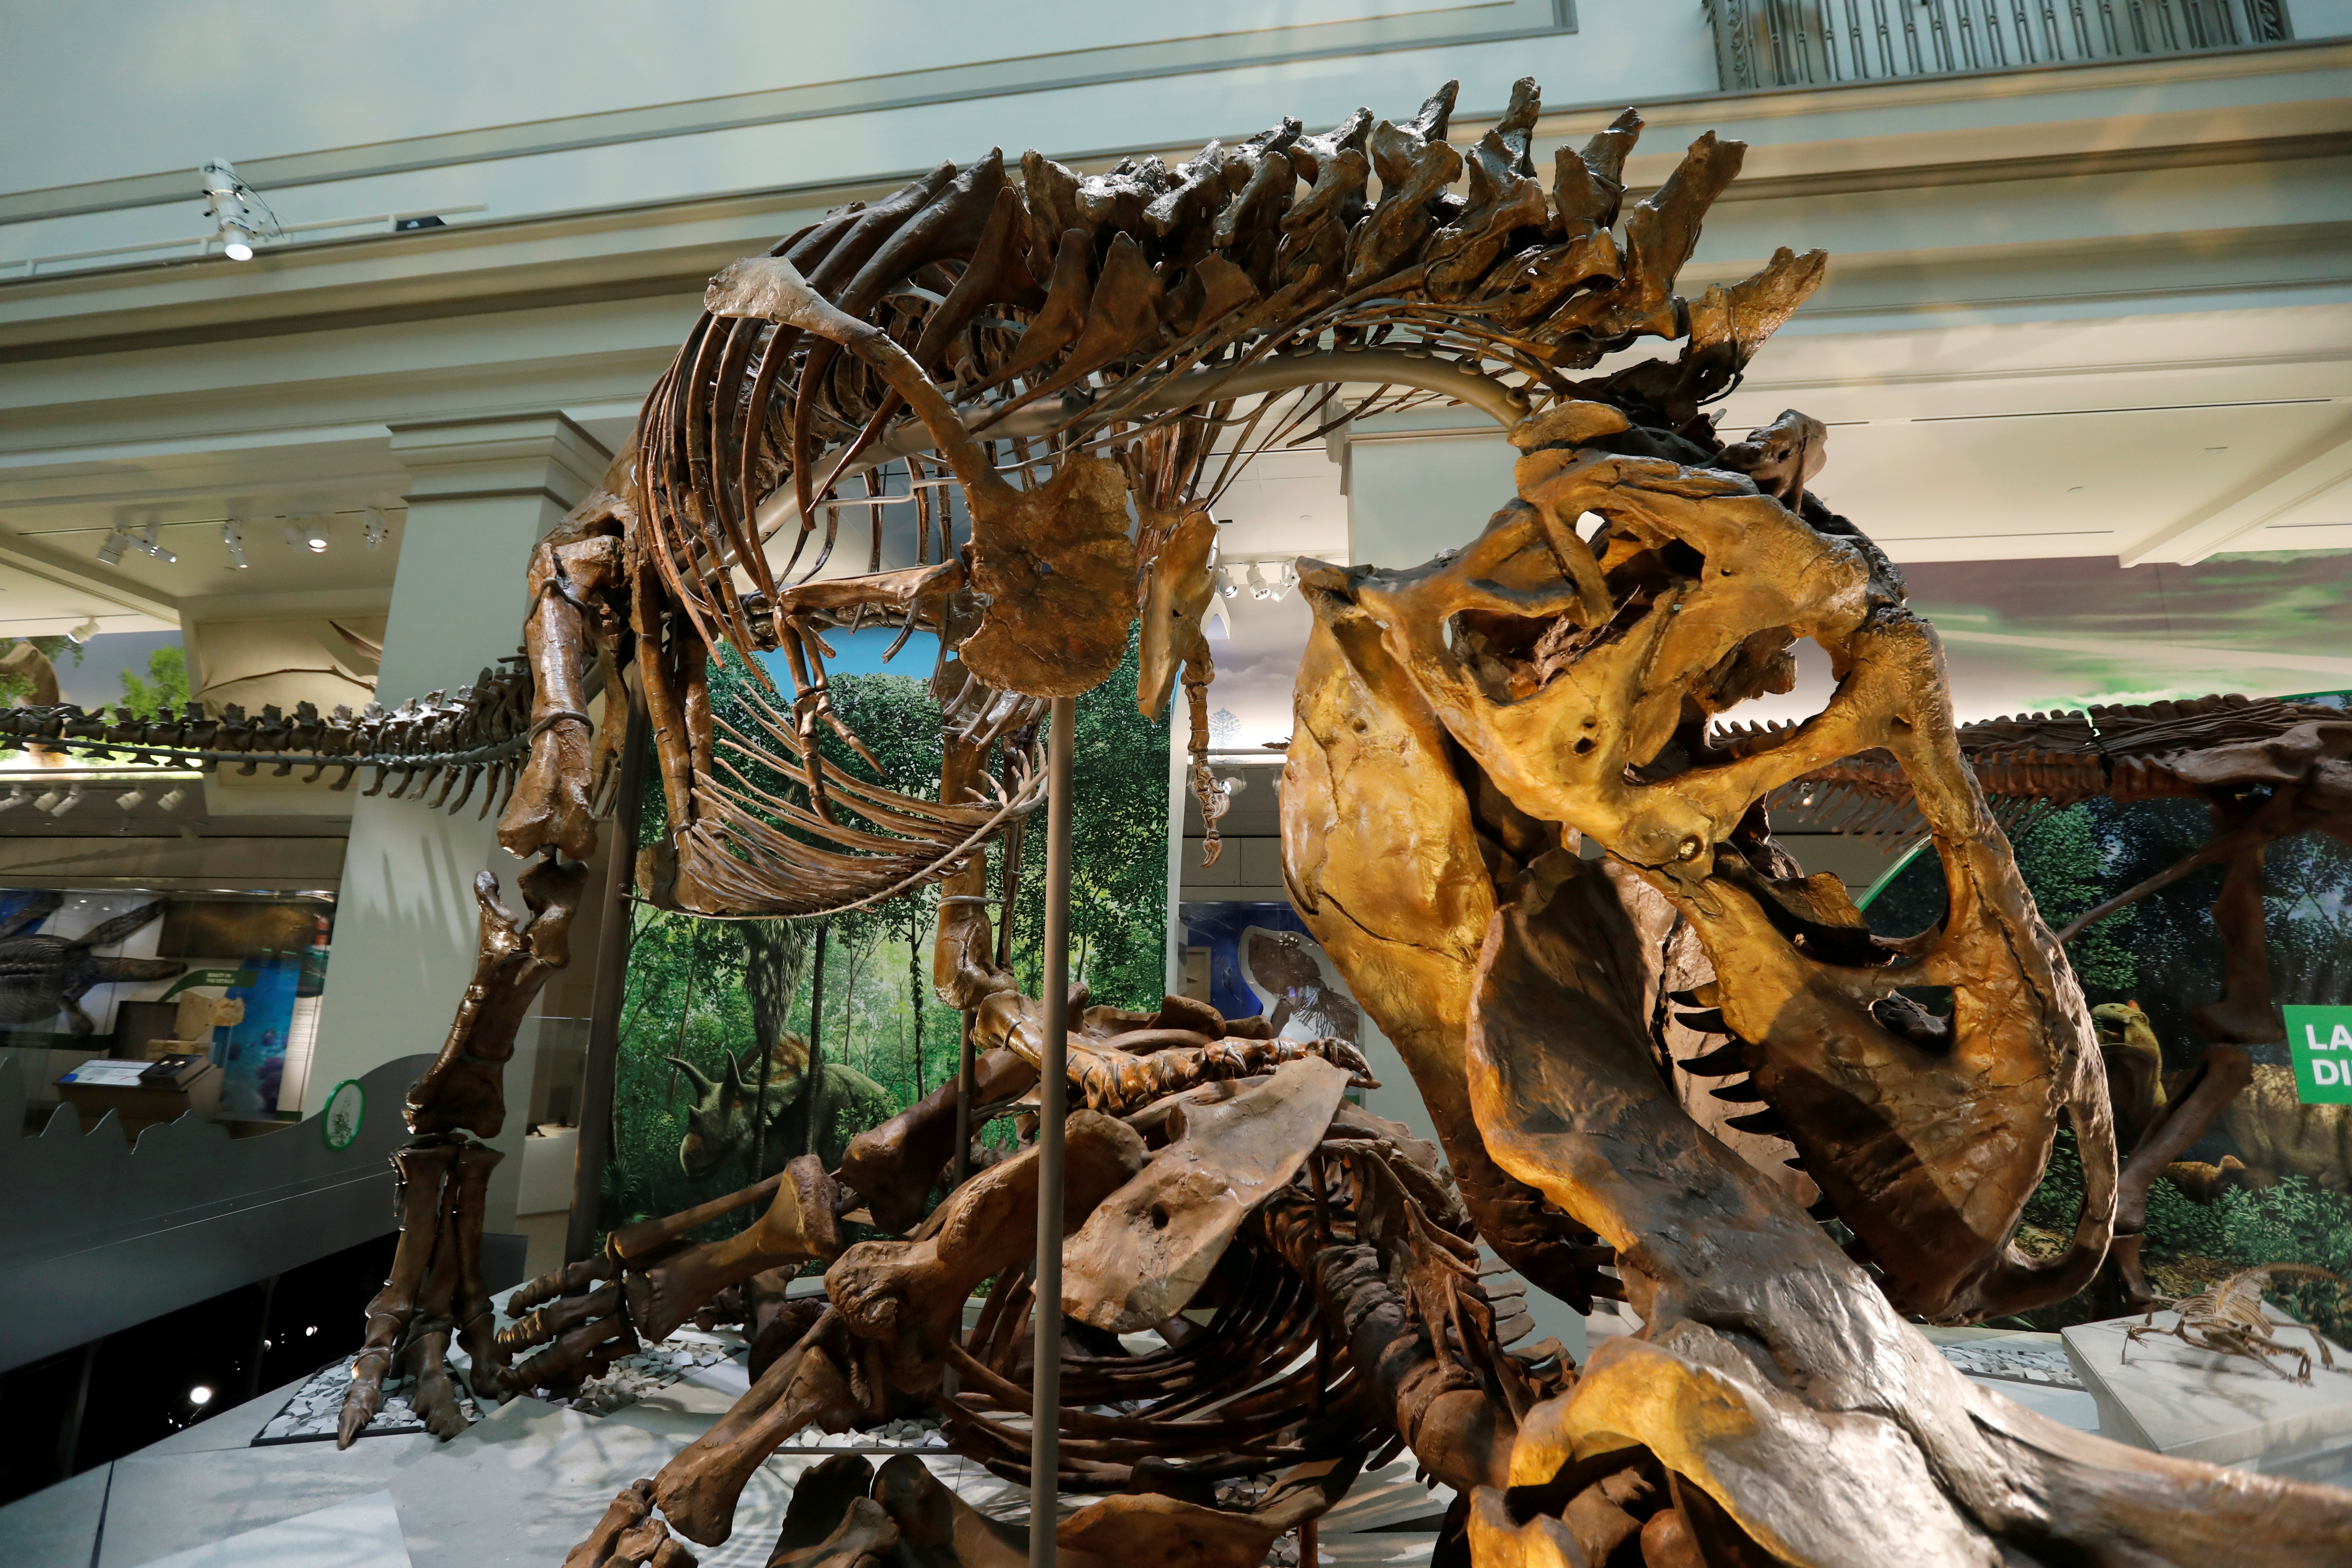 An Tyrannosaurus rex skeleton is seen during a media preview for the reopening of the Smithsonian’s Natural History Museum dinosaur and fossil hall after undergoing $110-million renovation in Washington, U.S., June 4, 2019. REUTERS/Kevin Lamarque